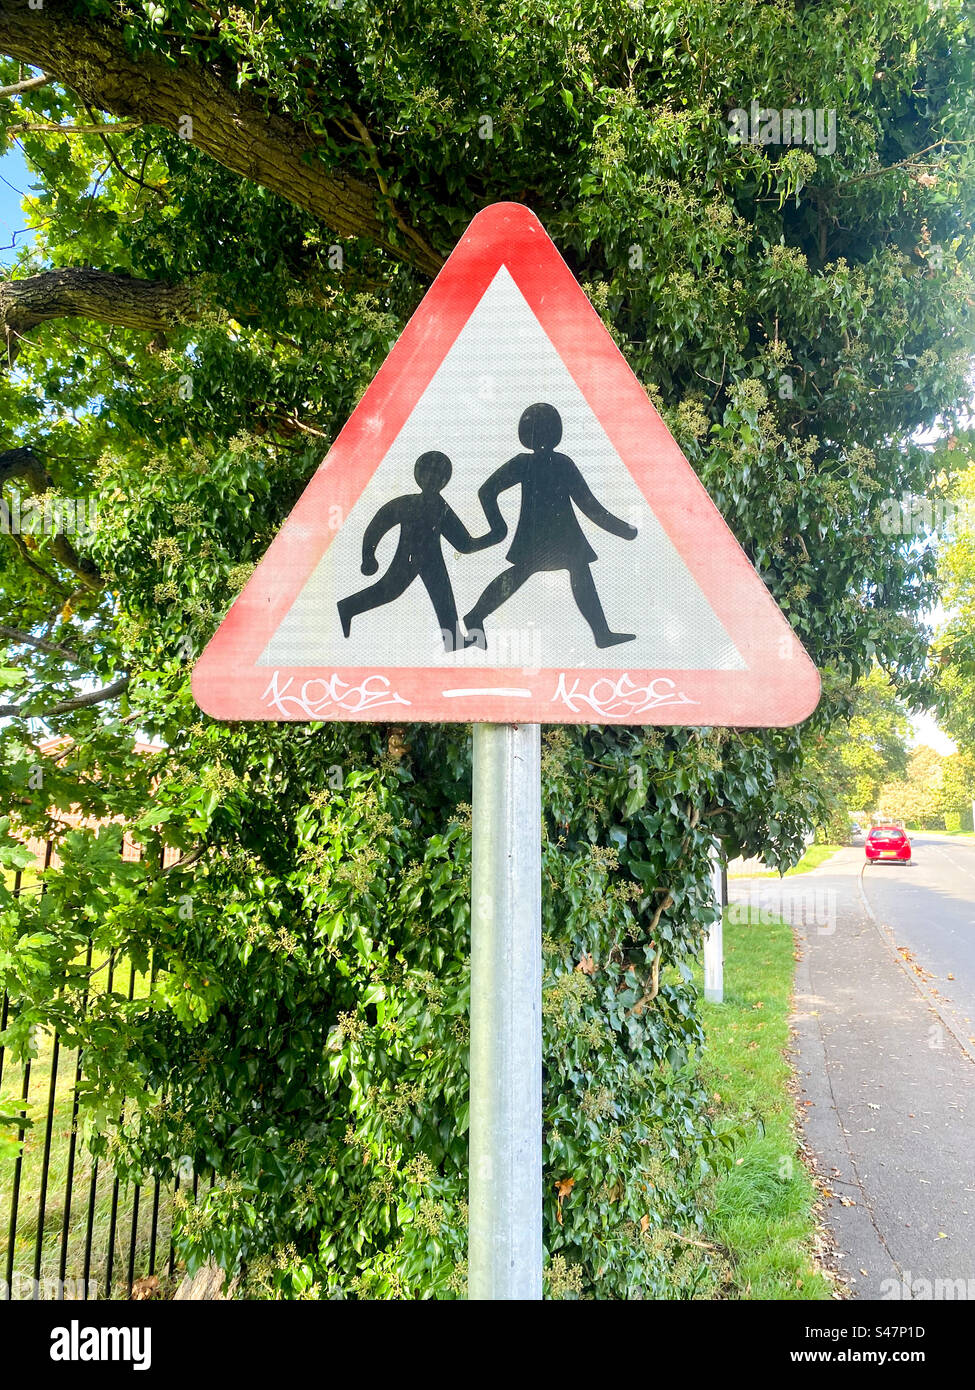 A triangle shaped road sign warning drivers about children crossing the road near a school. Stock Photo